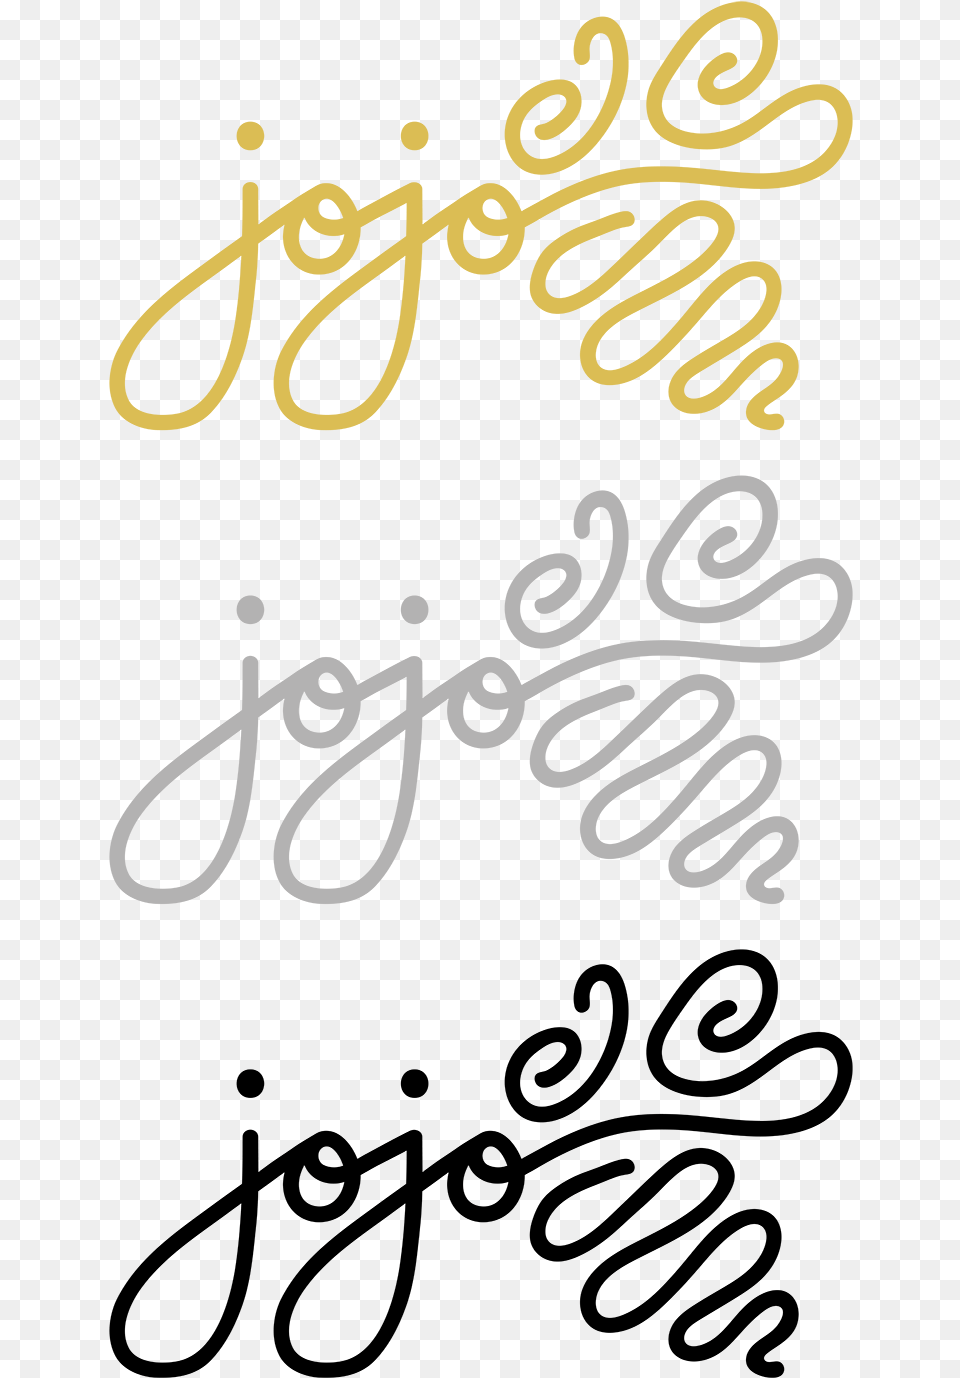 Logo Design By Tom Jones For This Project Calligraphy, Text, Handwriting Png Image